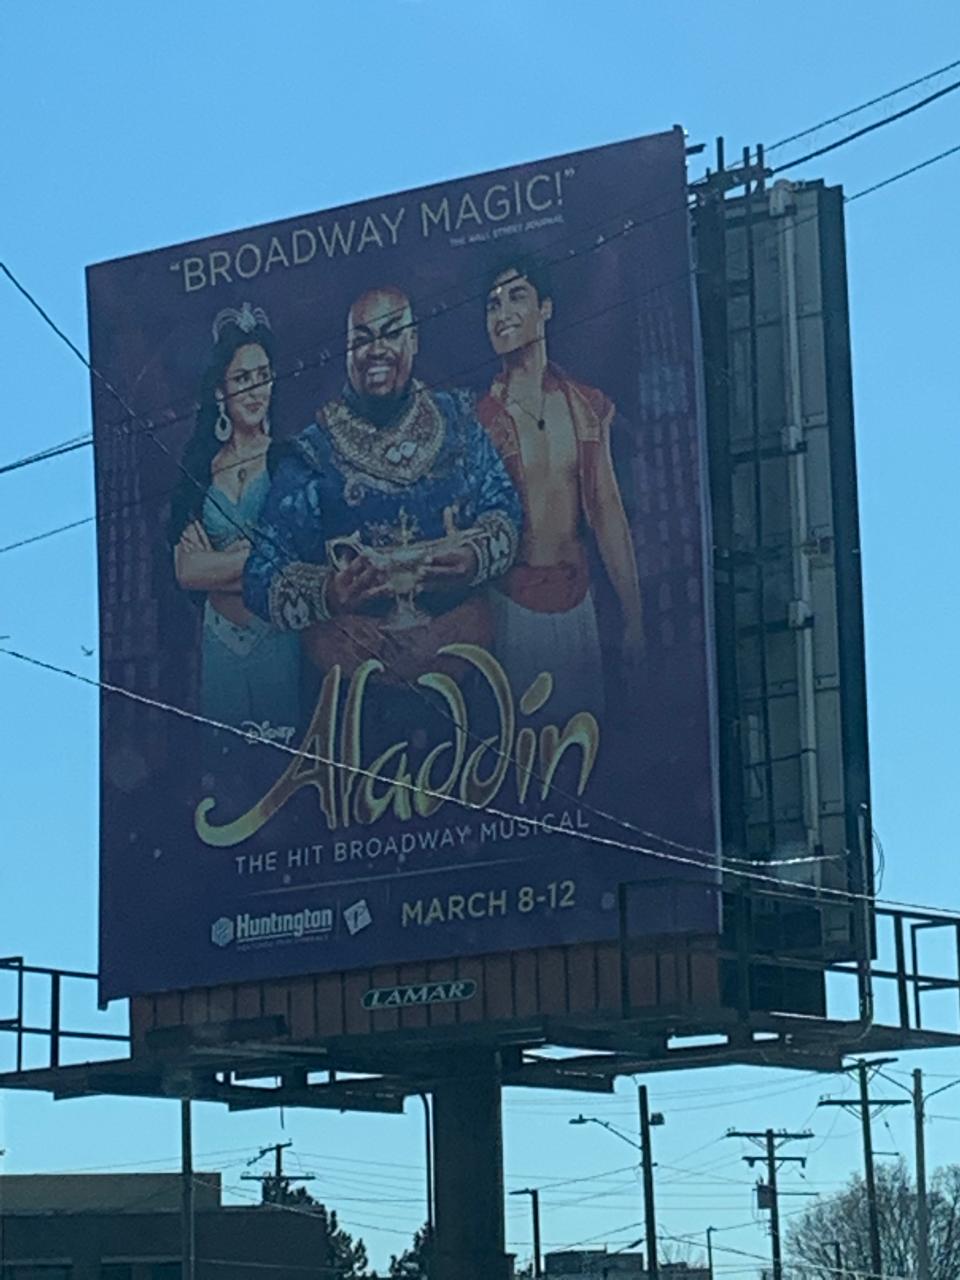 Marcus Martin is pictured as Genie on a billboard with his "Aladdin" co-stars near Playhouse Square in Cleveland.